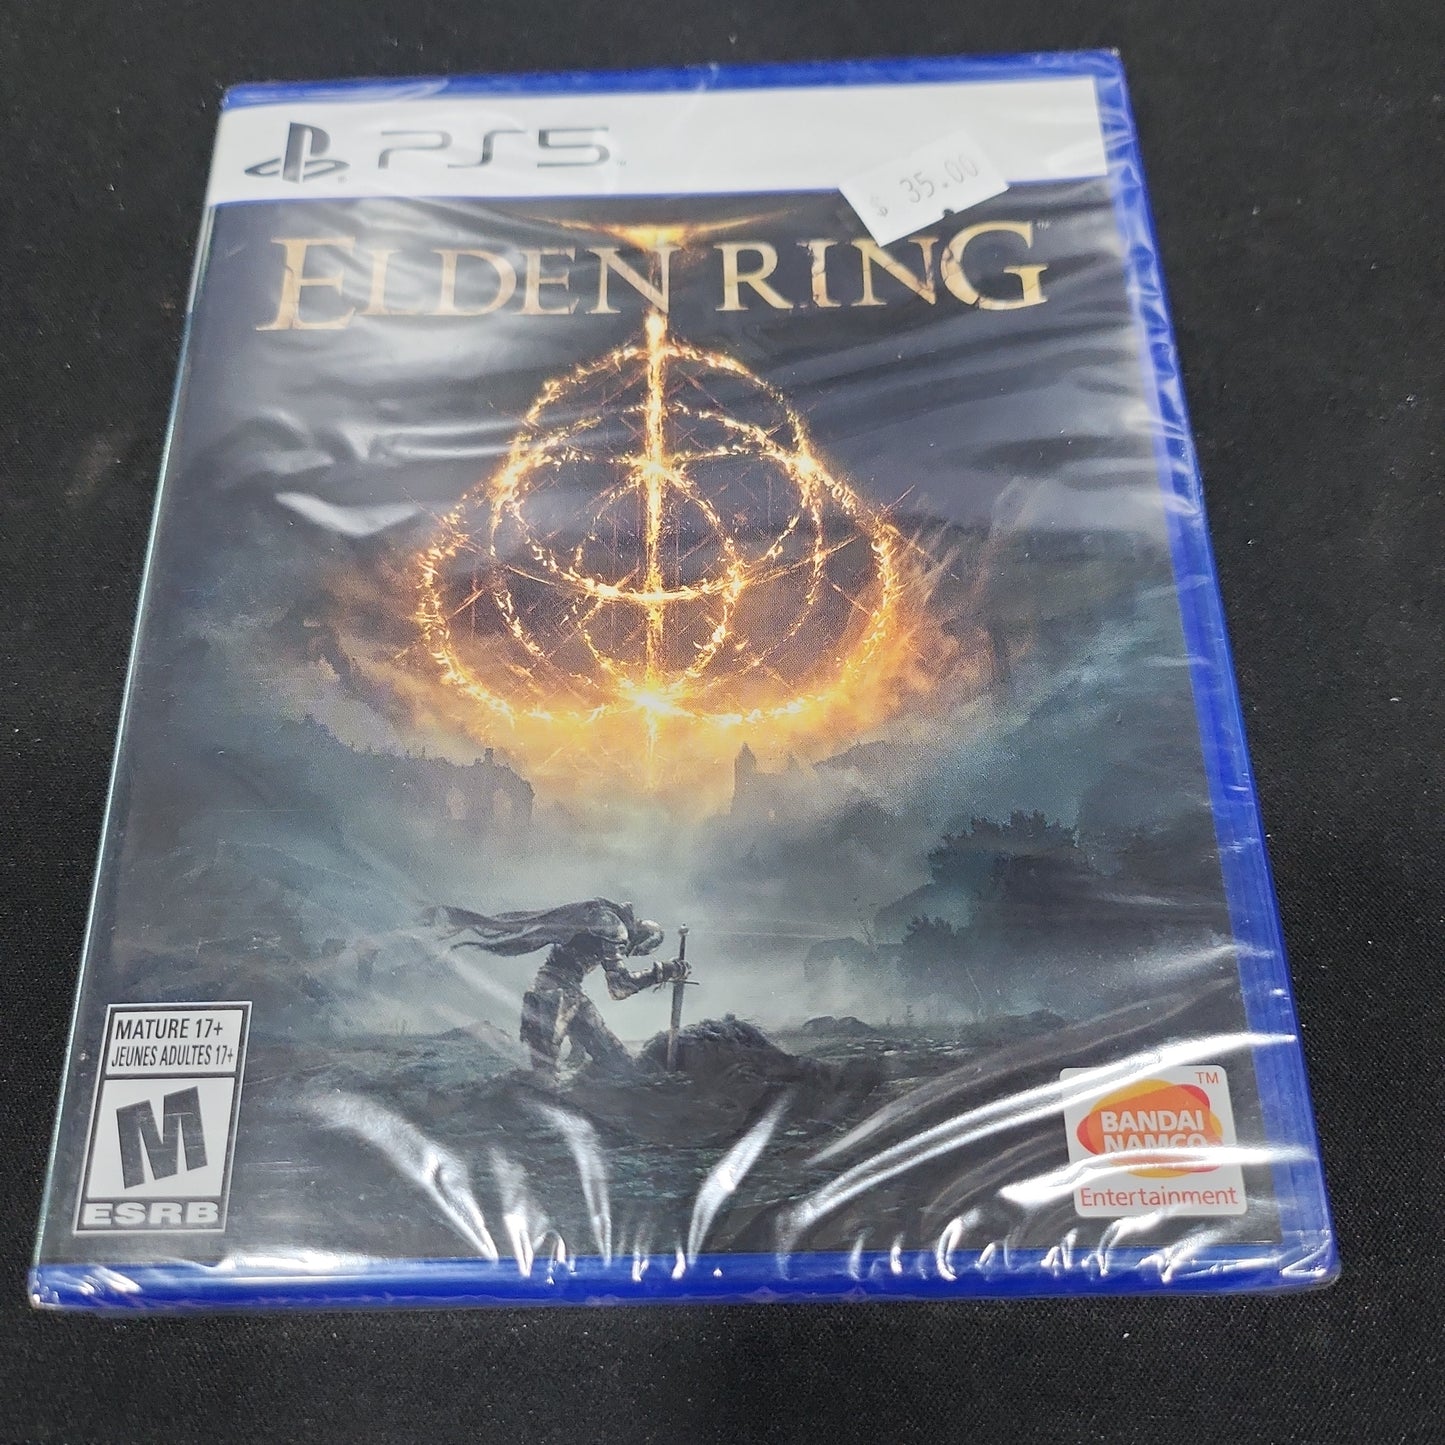 Elden ring ps5 (seal is ripped a bit)